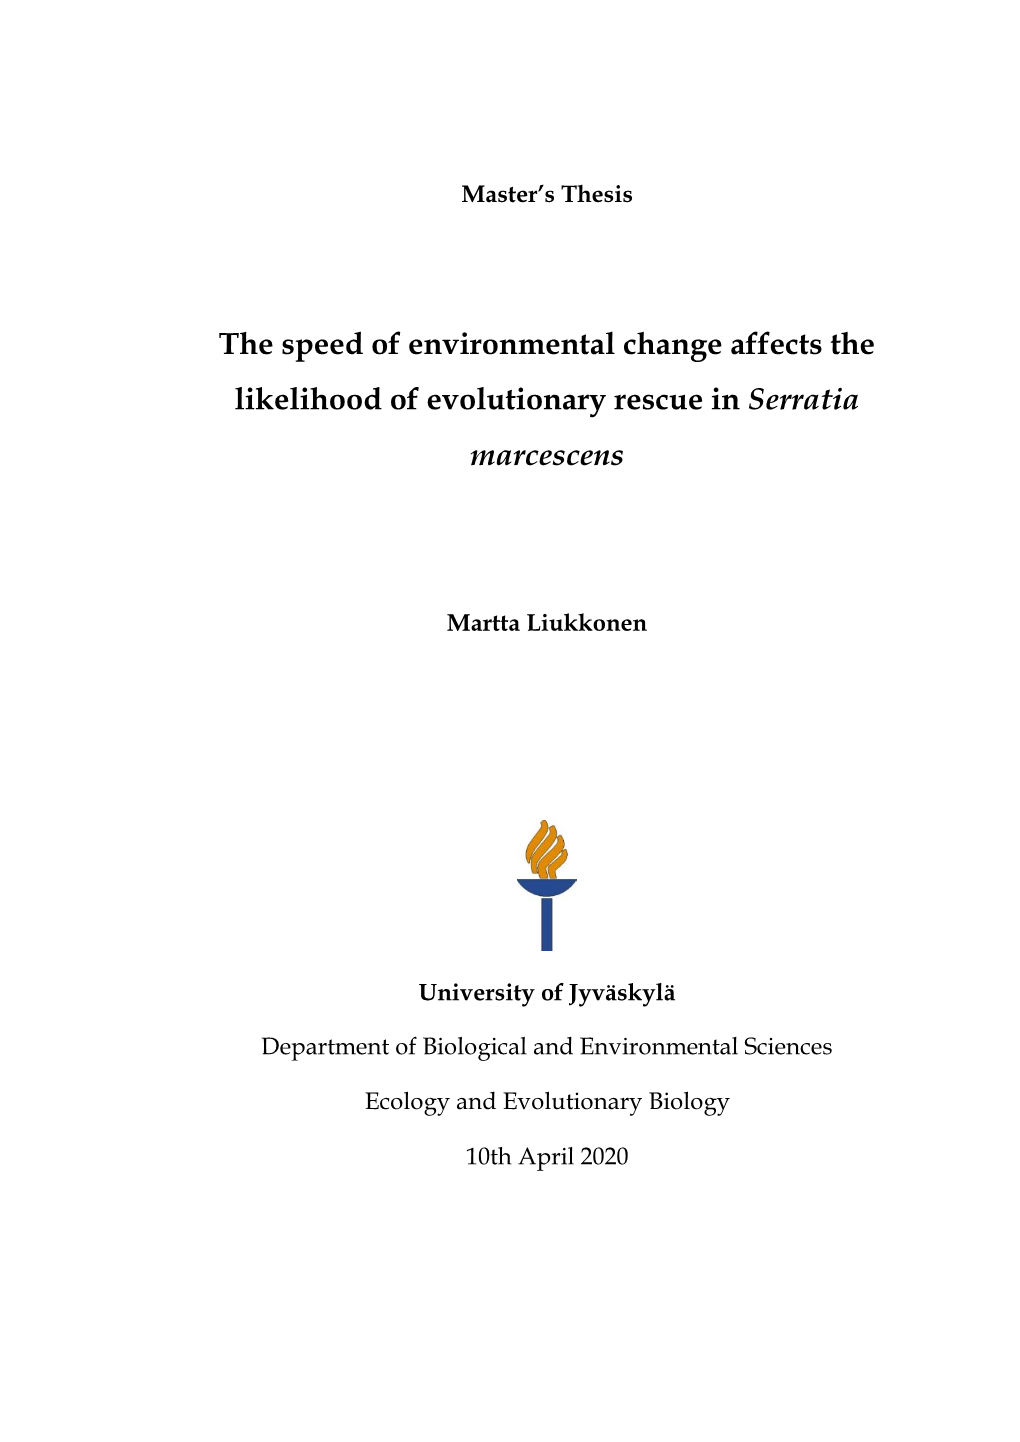 The Speed of Environmental Change Affects the Likelihood of Evolutionary Rescue in Serratia Marcescens